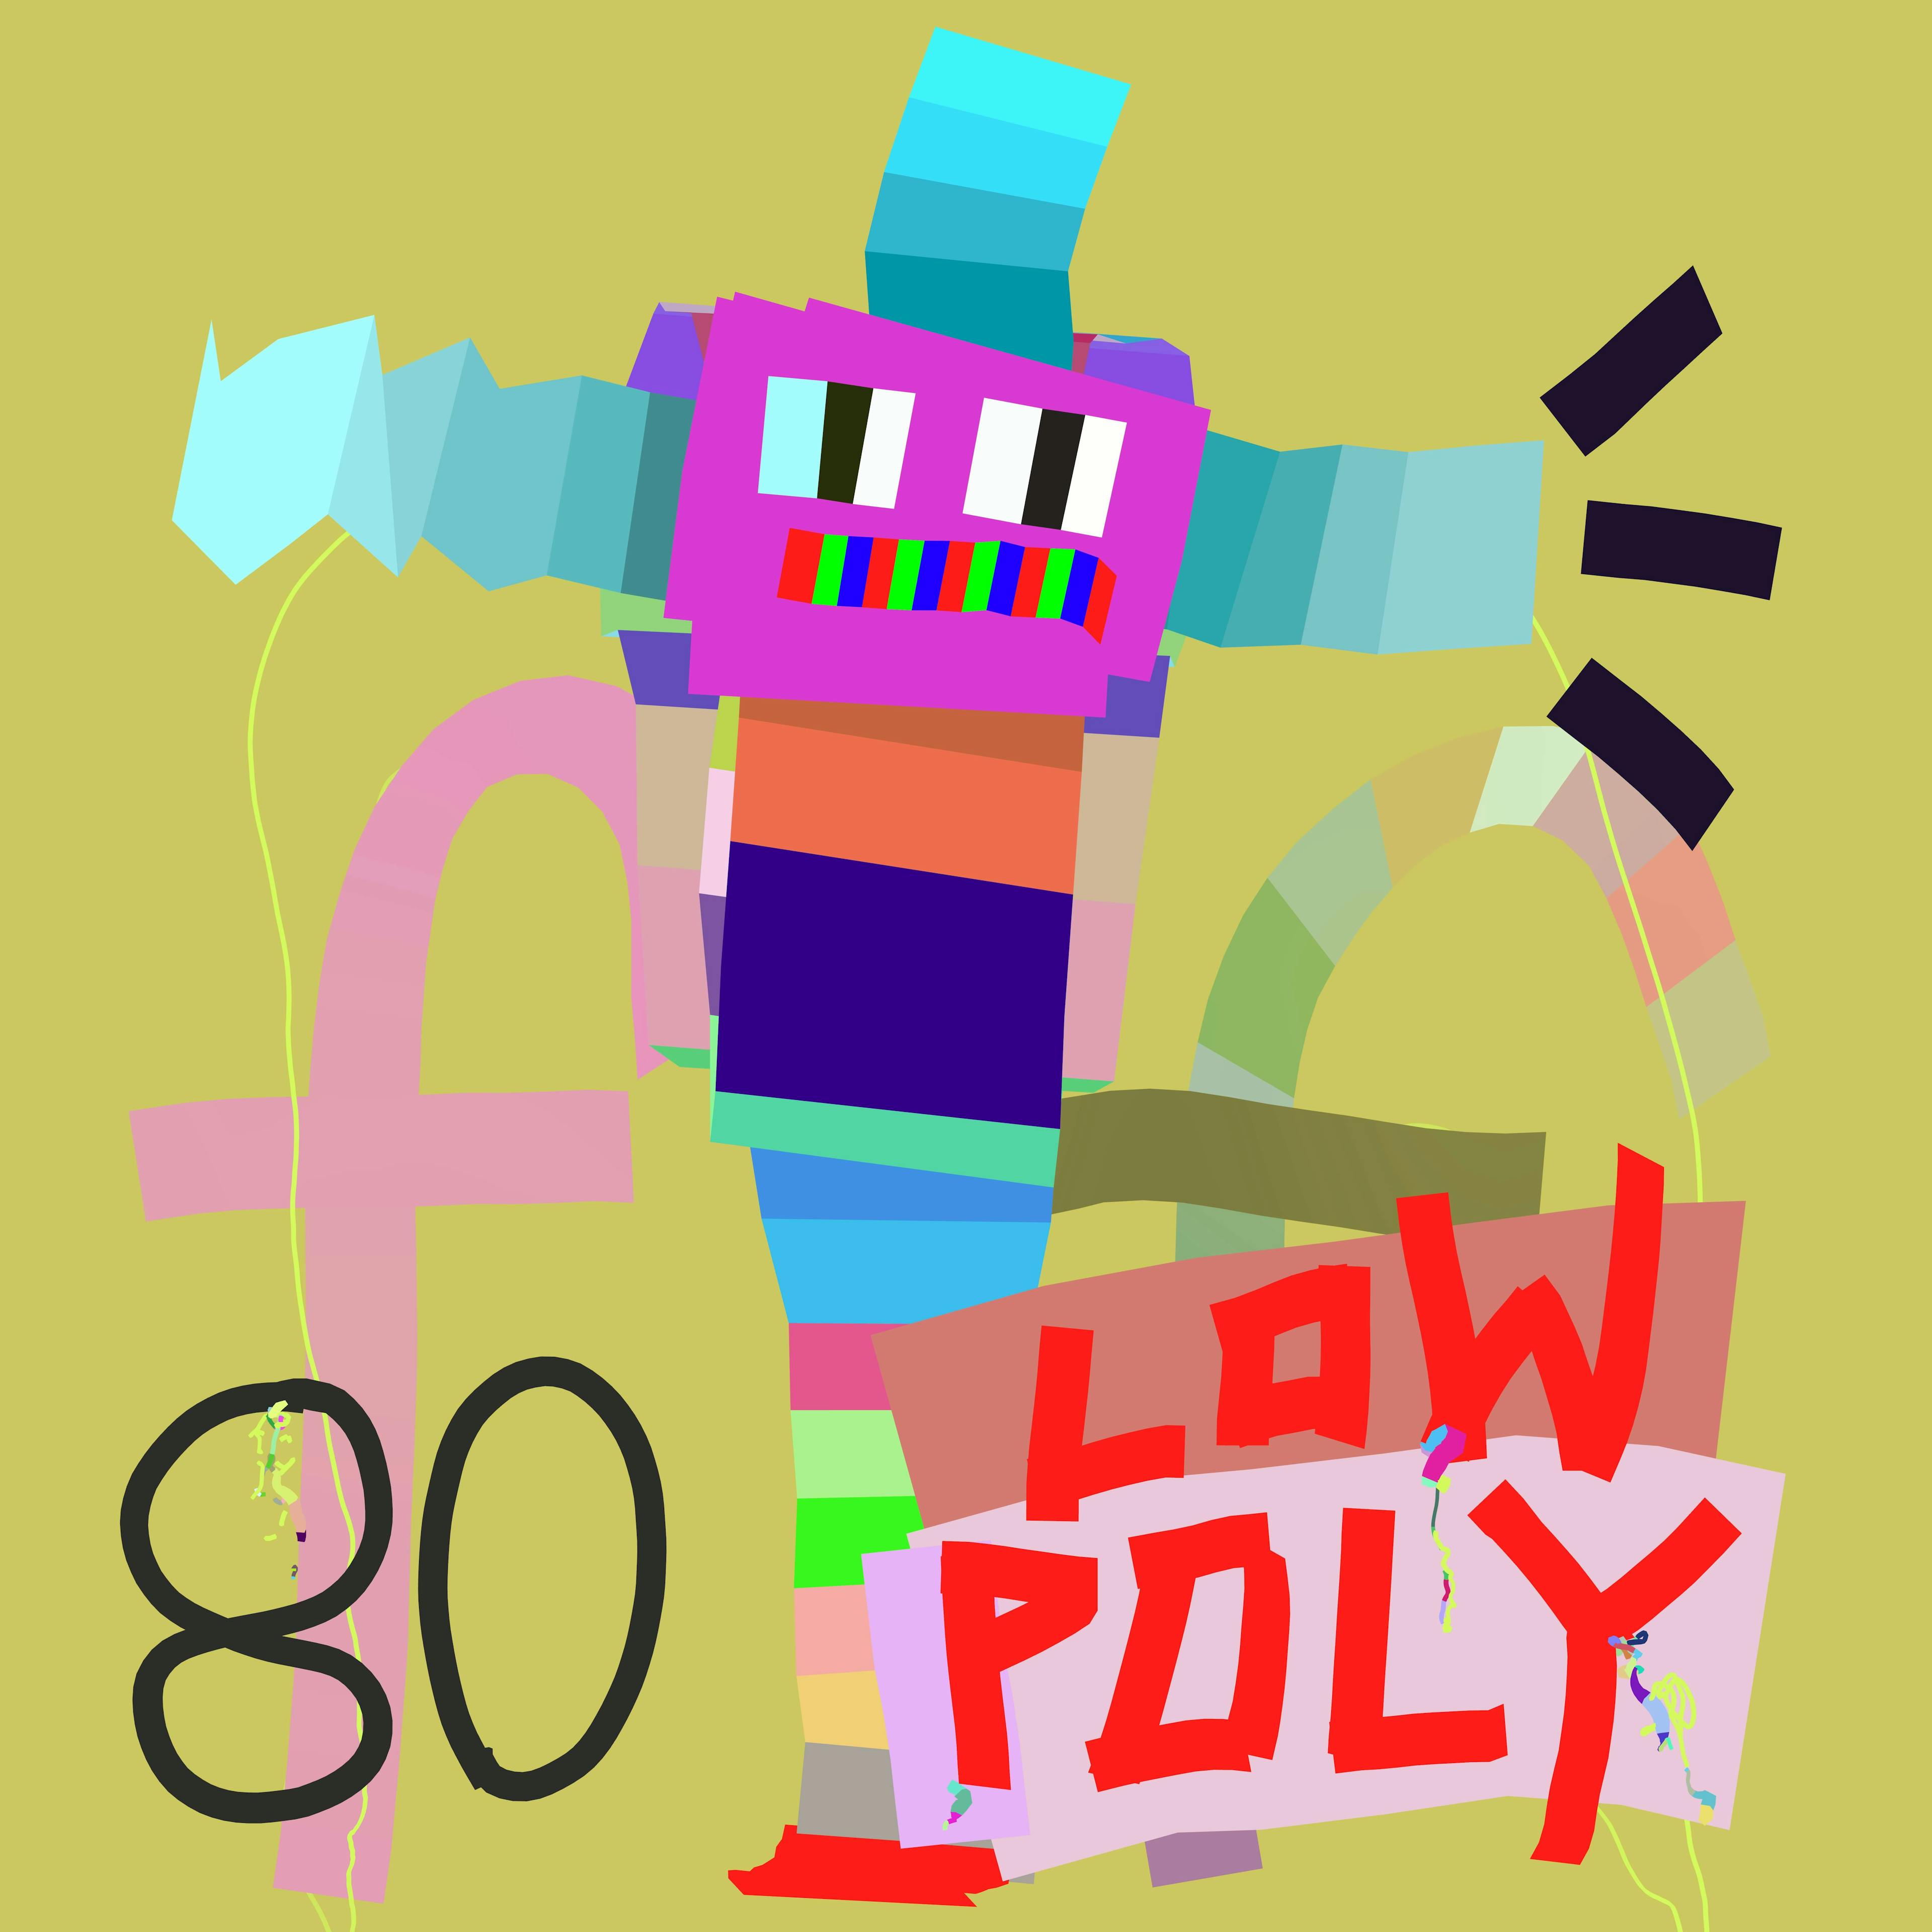 playful illustration of abstract shapes on a green background, numbers and letters playfully engage with friendly colorful shapes, number 80 is on the left, hand drawn text says 'Low poly'